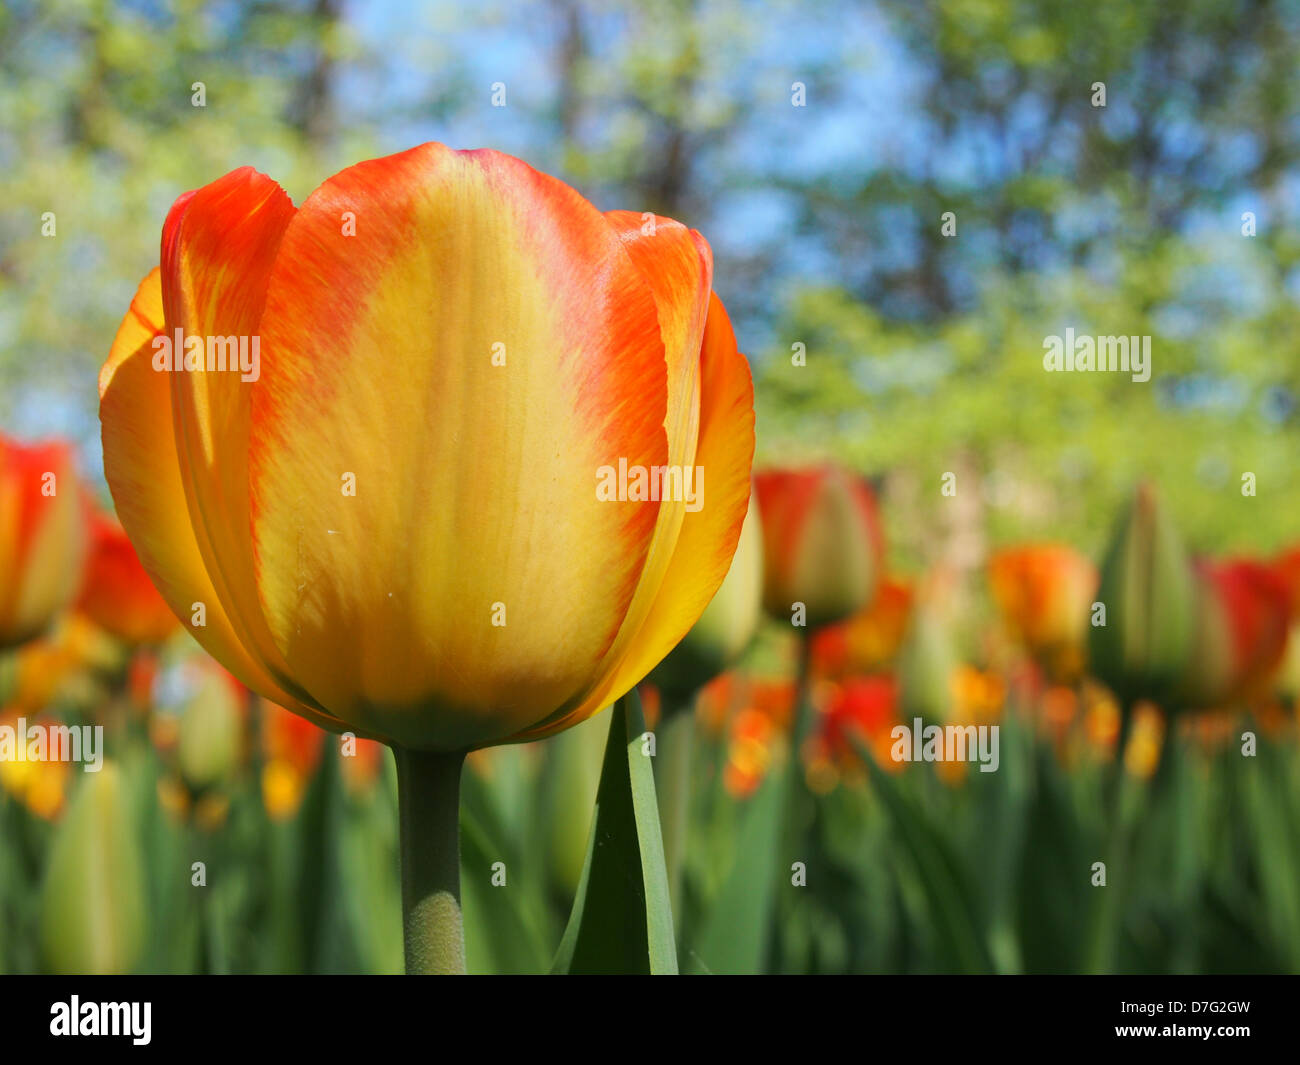 one orange and yellow tulip in foreground, flower bed in background Stock Photo